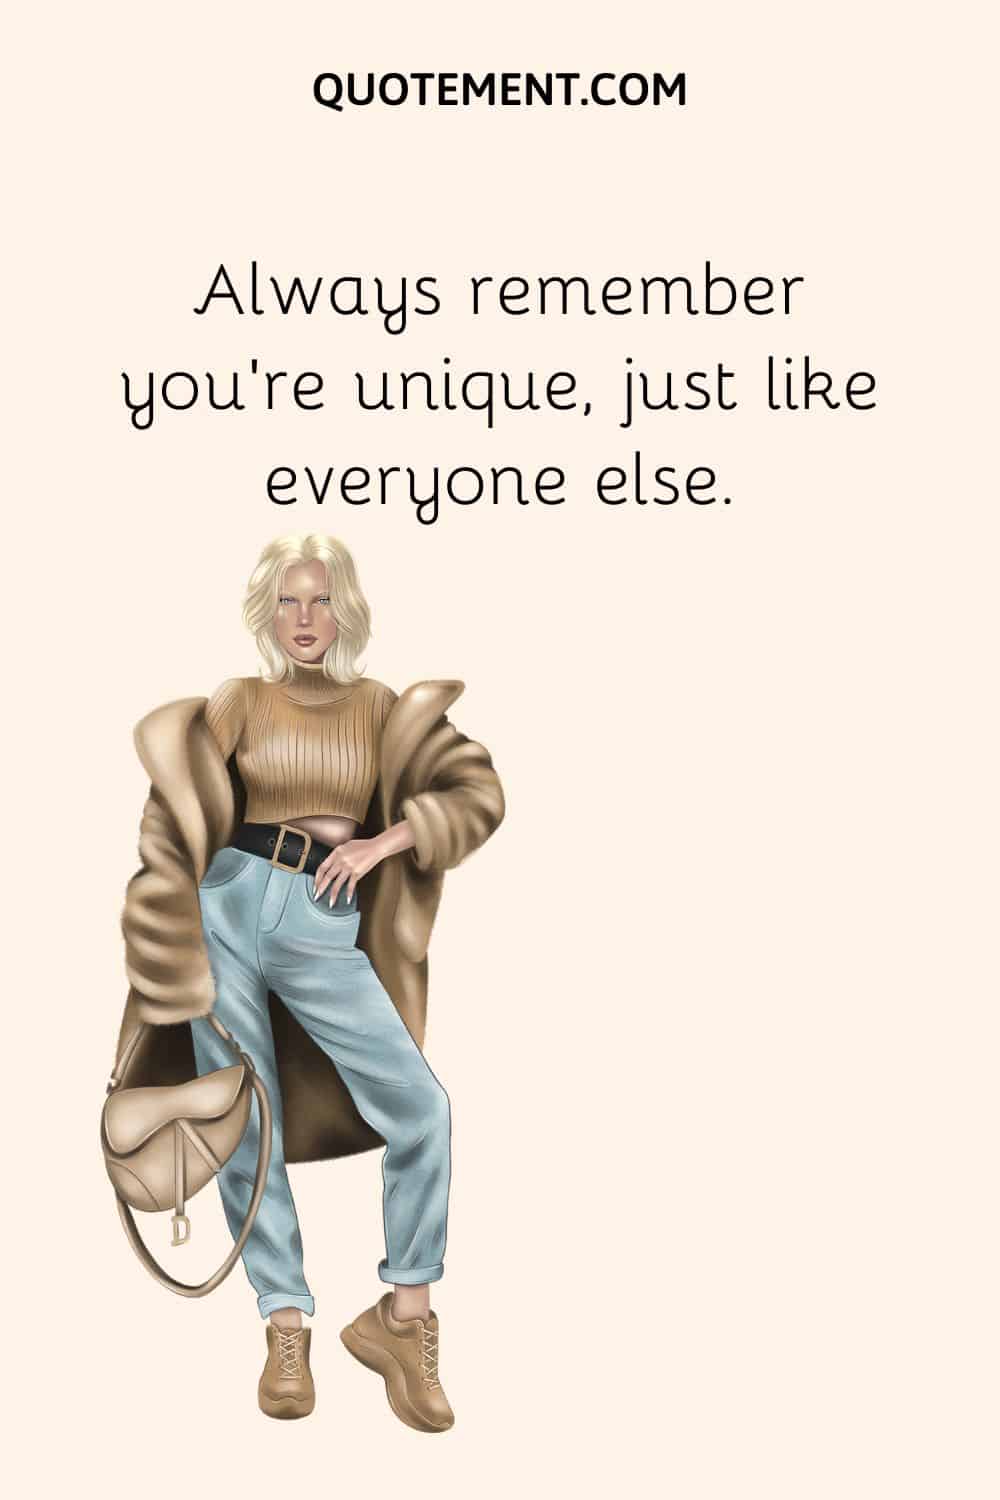 Always remember you’re unique, just like everyone else.